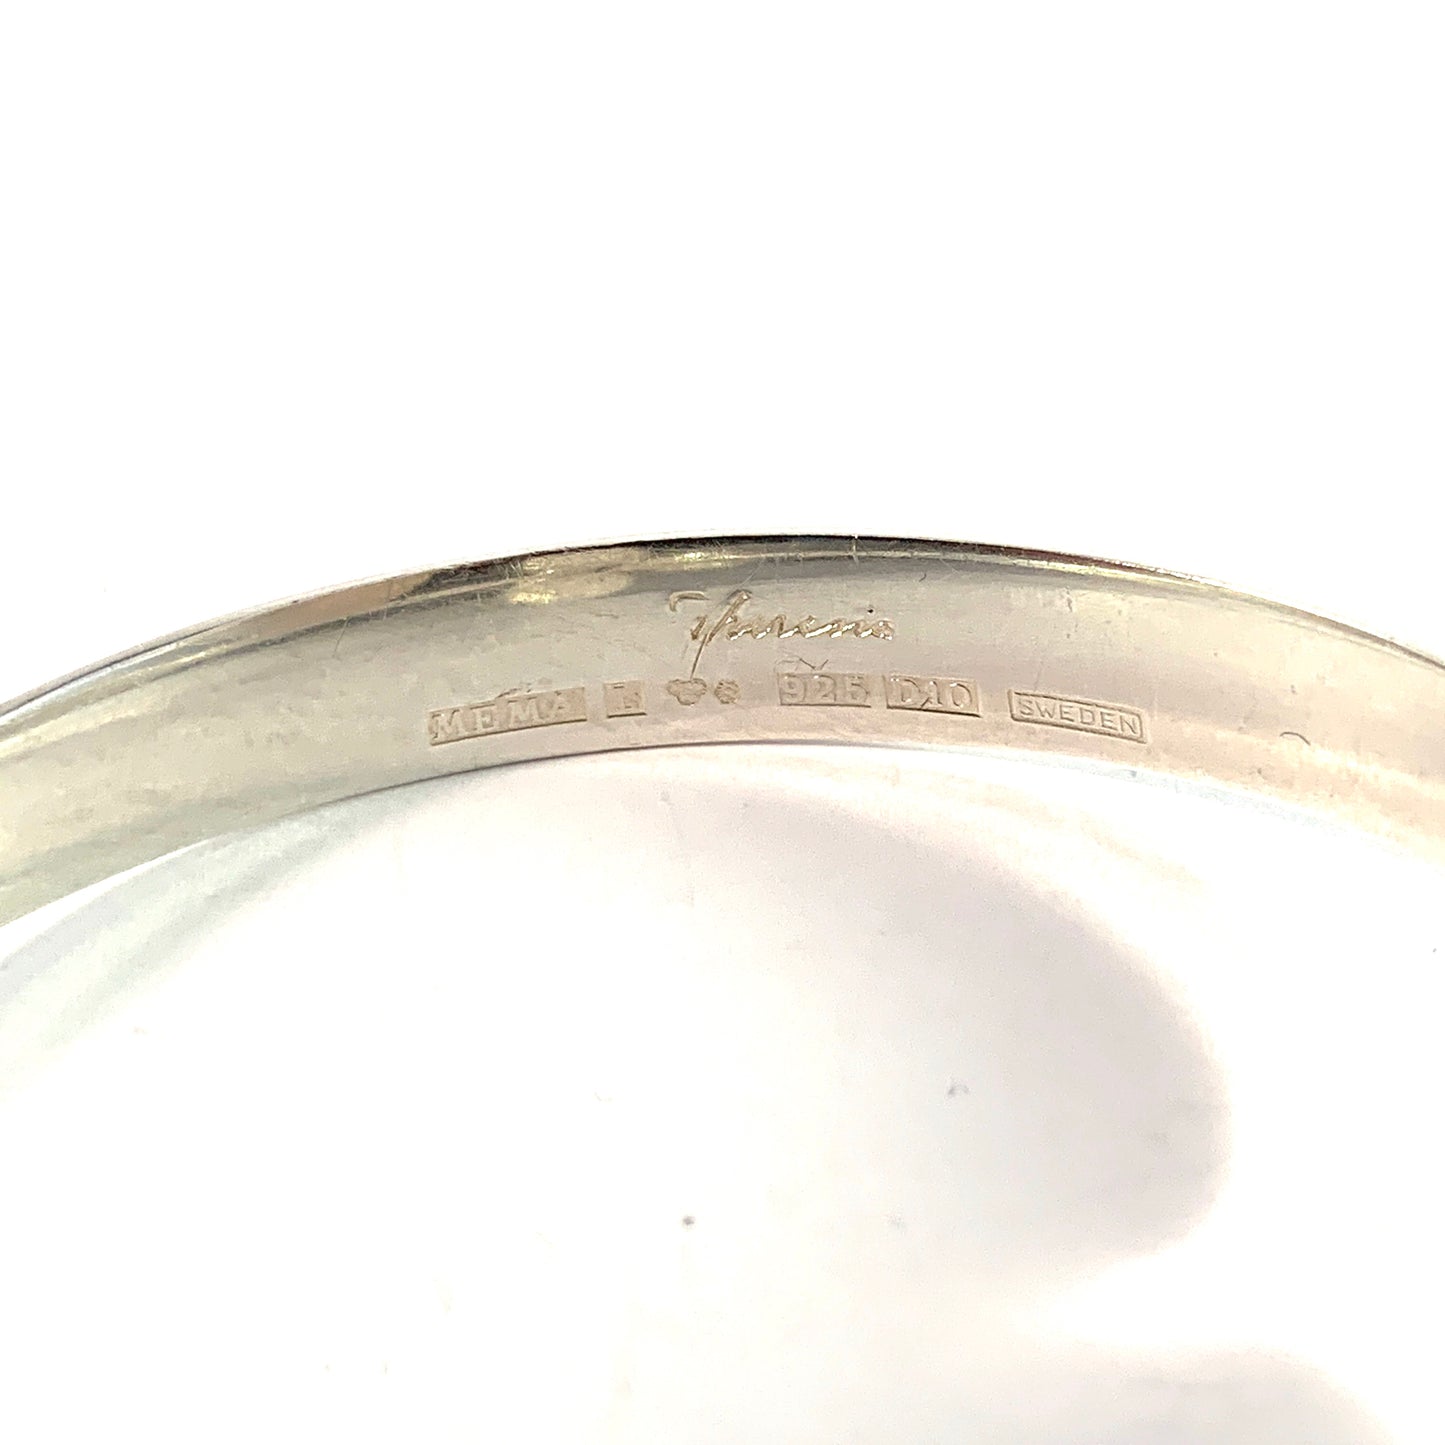 Theresia Hvorslev, Sweden year 1978. Sterling Silver Open/Close Bangle Bracelet. Design: Water Lily